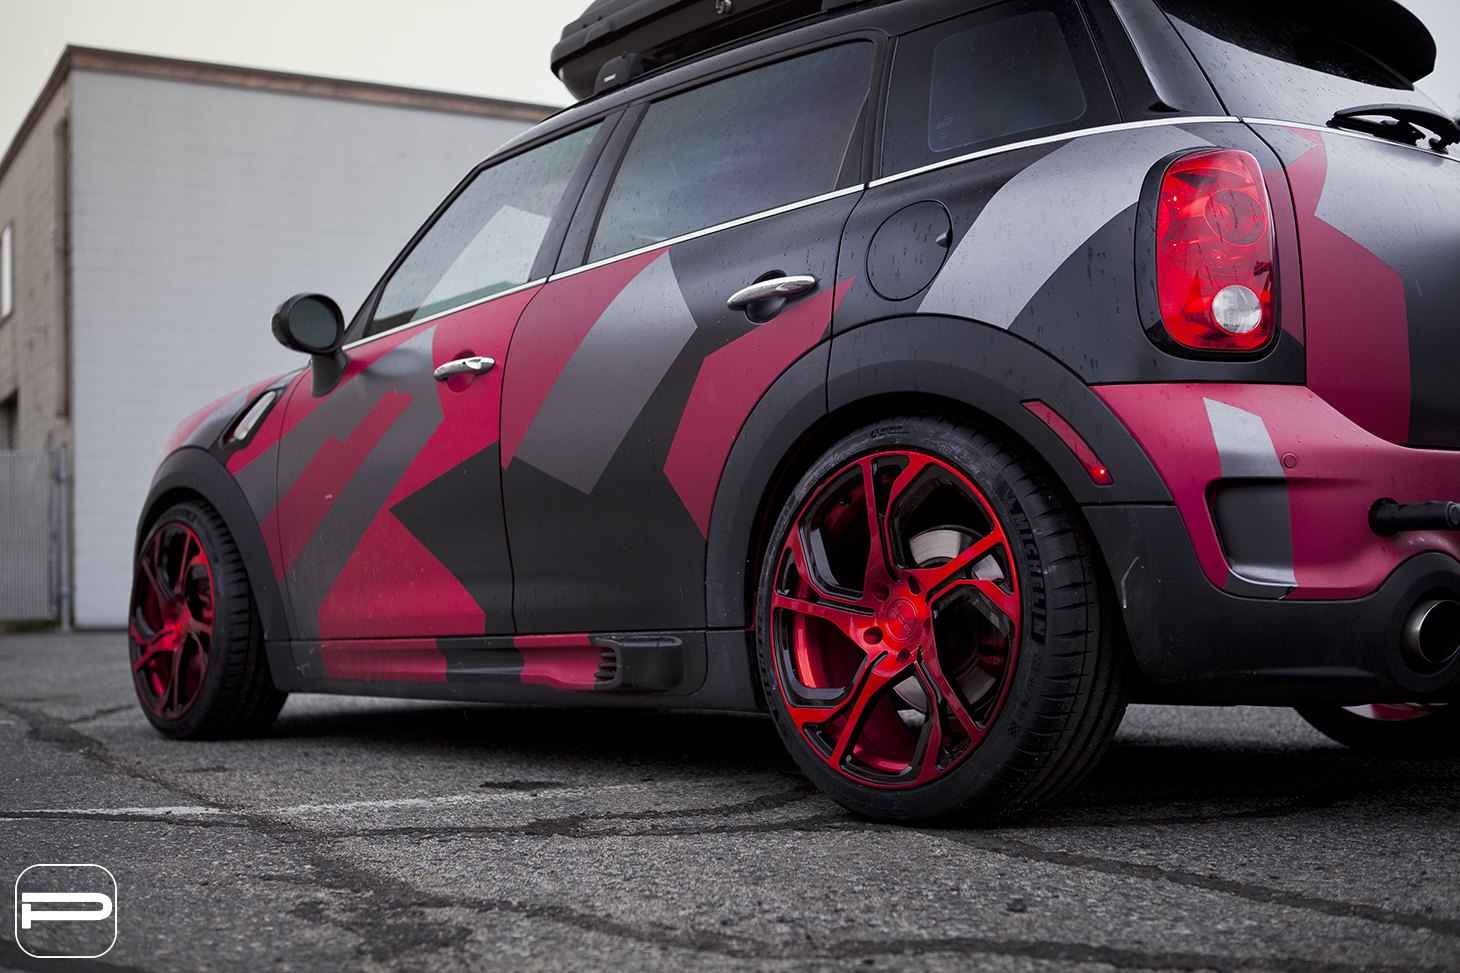 Custom Painted Mini Countryman on Michelin Tires - Photo by PUR Wheels